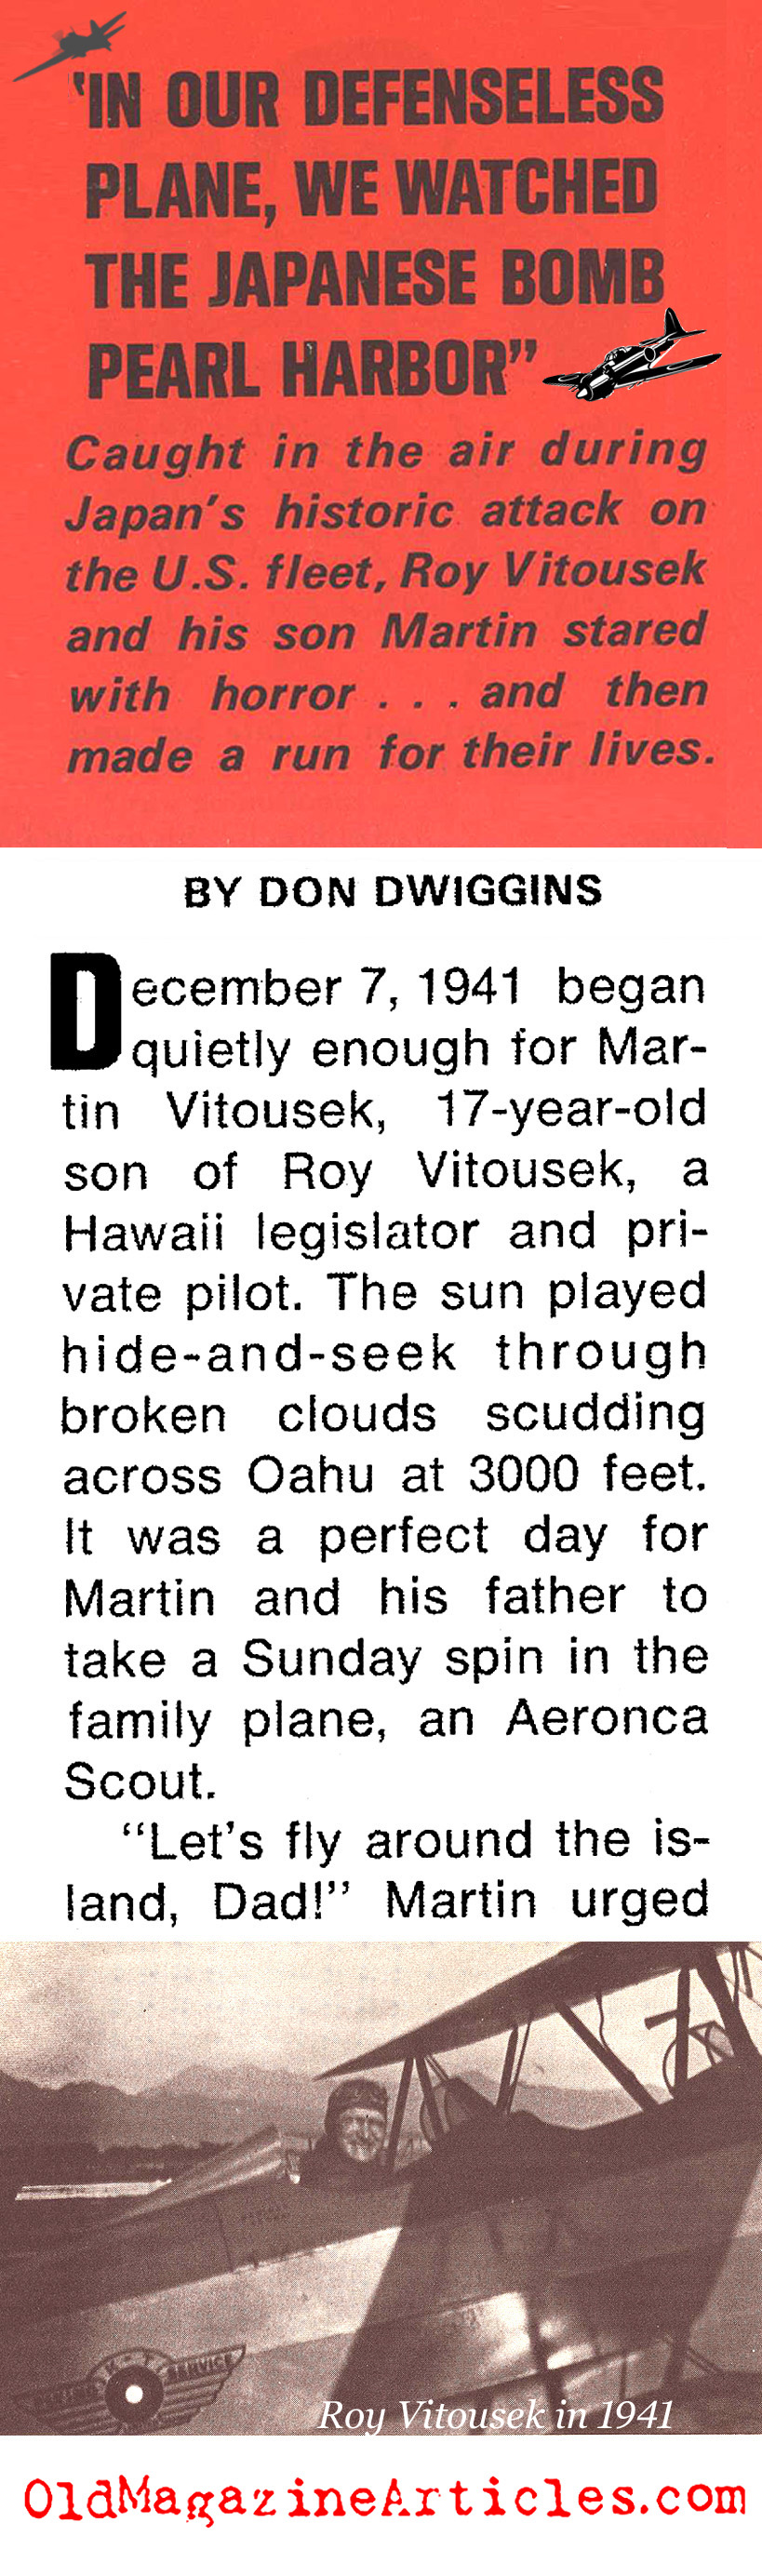 Father and Son Over Pearl Harbor (Pageant Magazine, 1970)